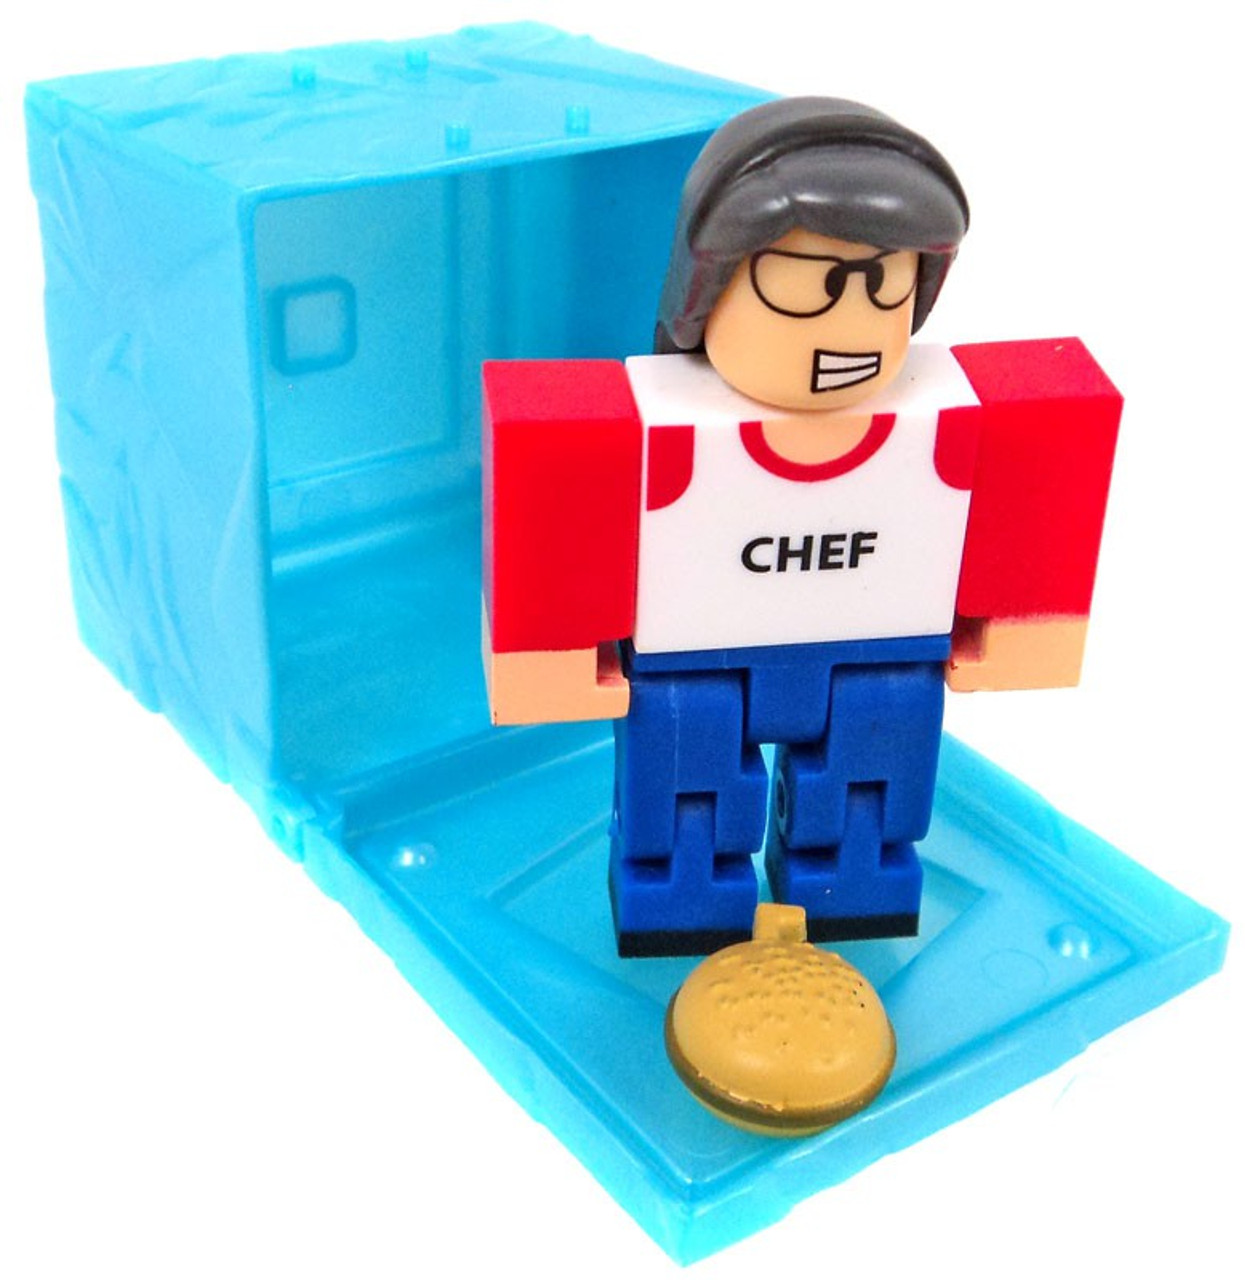 Roblox Red Series 3 High School Life Lunch Lady 3 Mini Figure Blue Cube With Online Code Loose Jazwares Toywiz - high school life roblox promo codes 2020